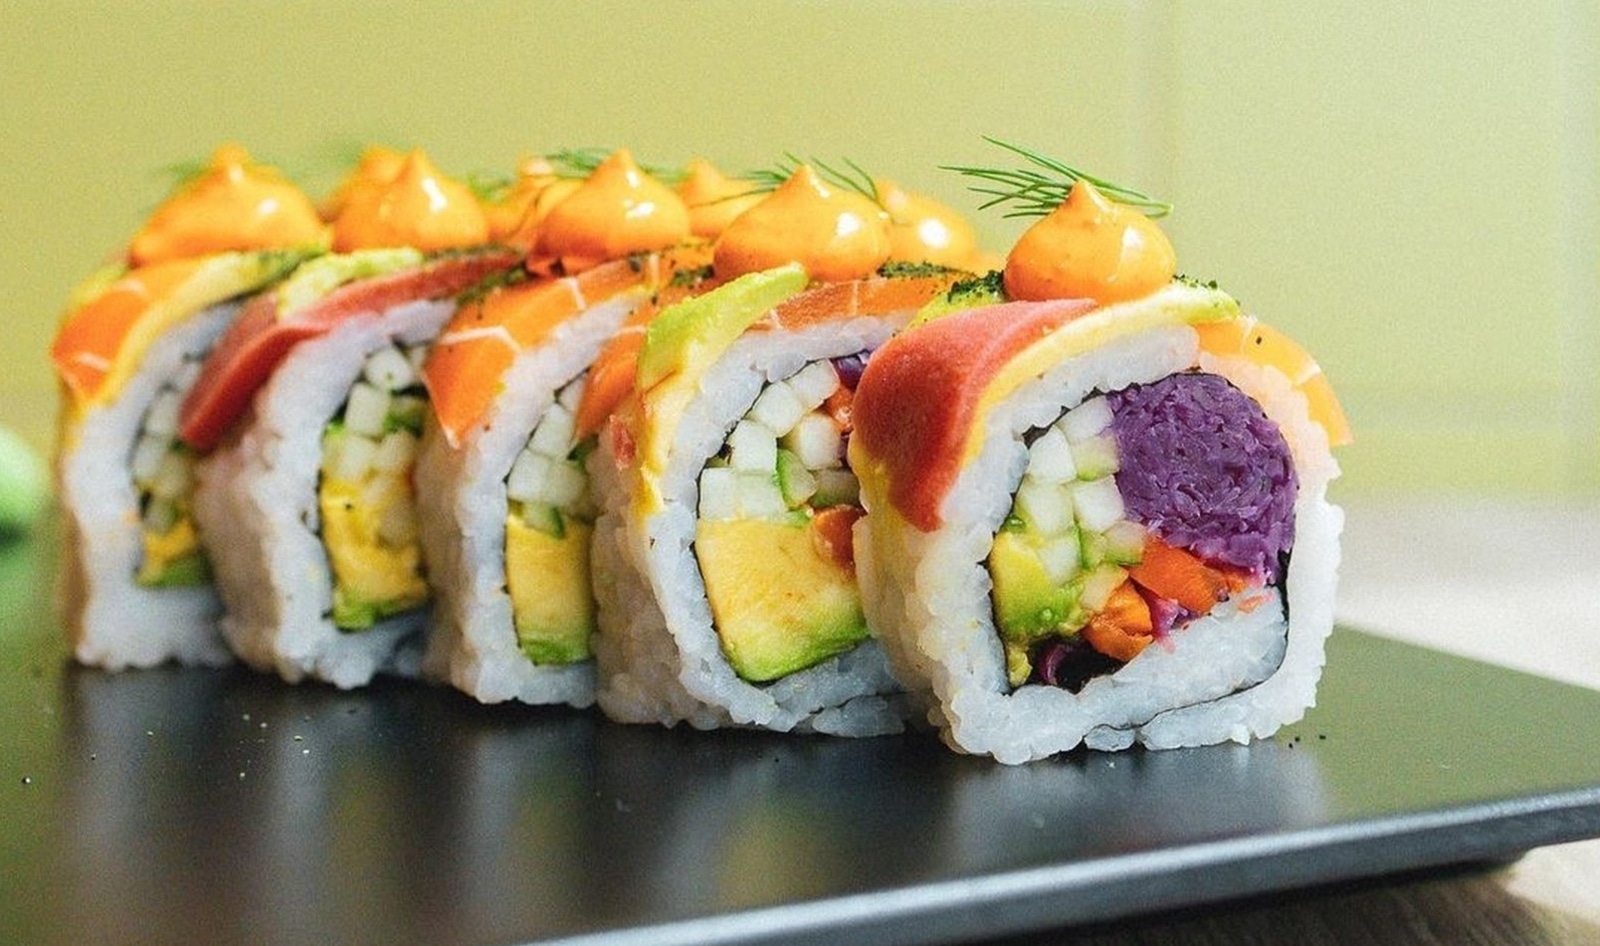 6 Places to Find Great Vegan Sushi in New York City